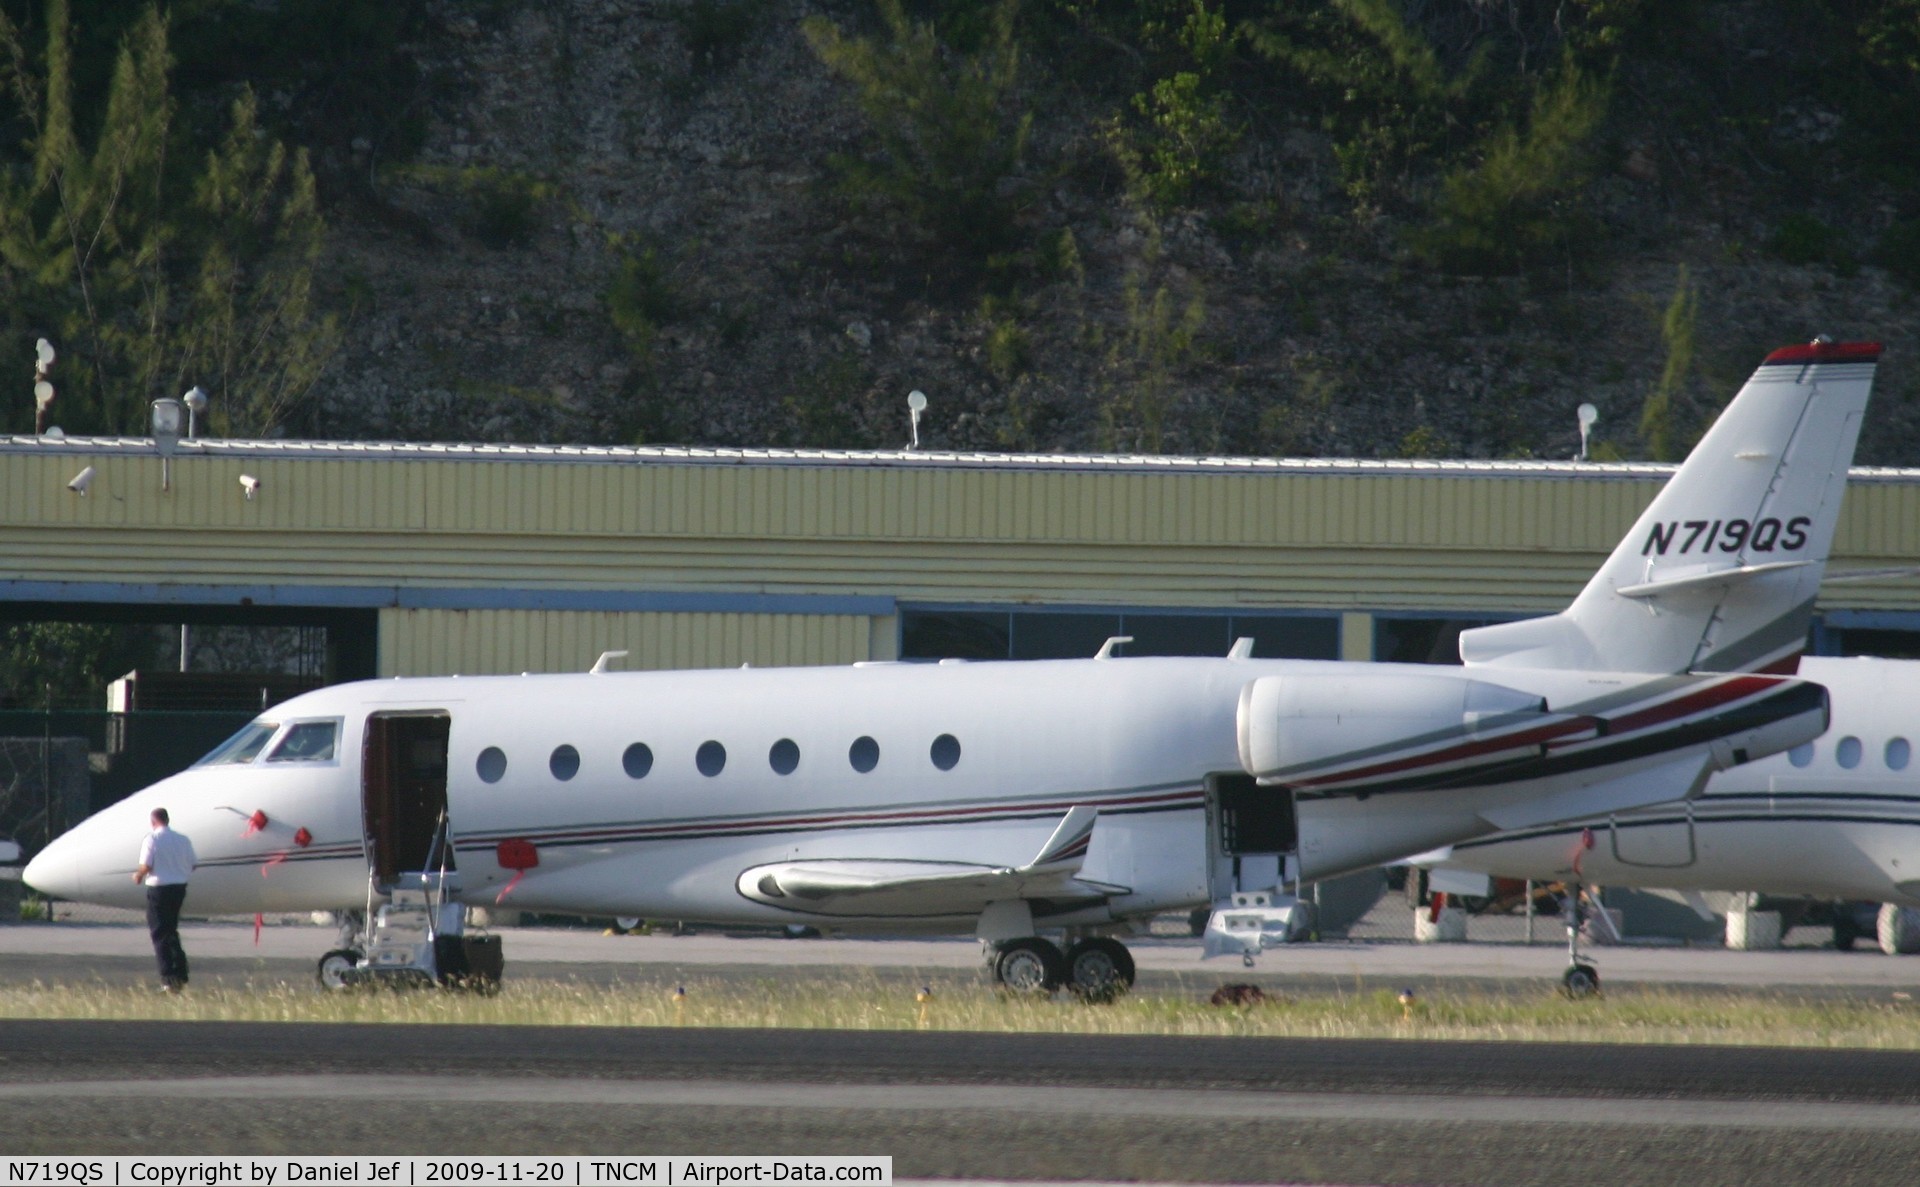 N719QS, 2007 Israel Aircraft Industries Gulfstream 200 C/N 162, n719qs just arived and park at the cargo ramp